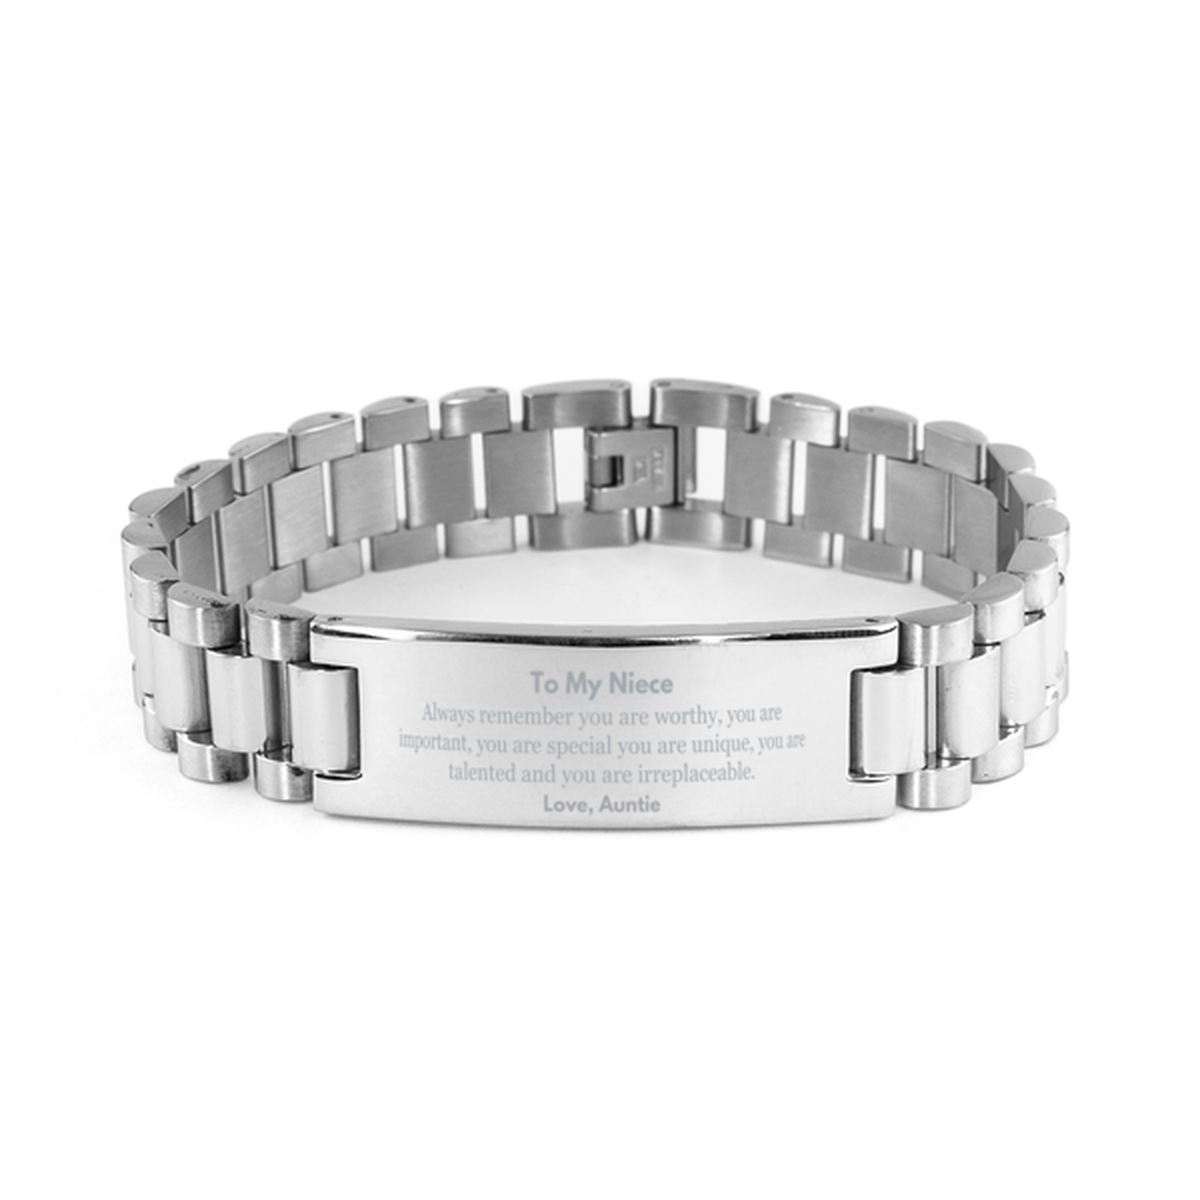 Niece Birthday Gifts from Auntie, Inspirational Ladder Stainless Steel Bracelet for Niece Christmas Graduation Gifts for Niece Always remember you are worthy, you are important. Love, Auntie